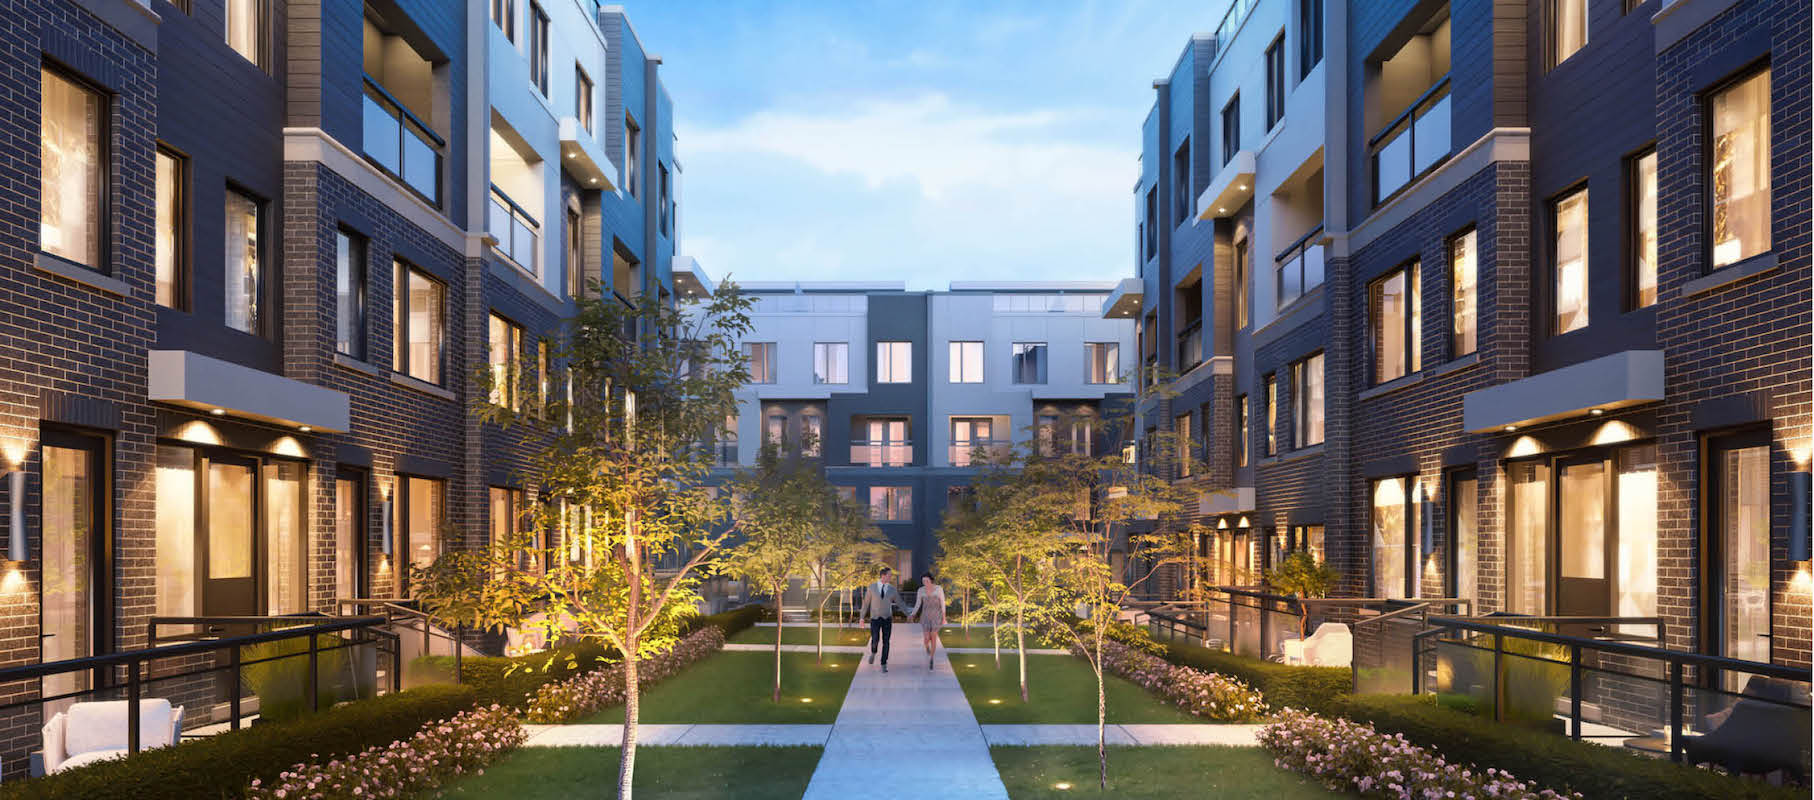 Rendering of The Way Towns 2 courtyard in the evening.